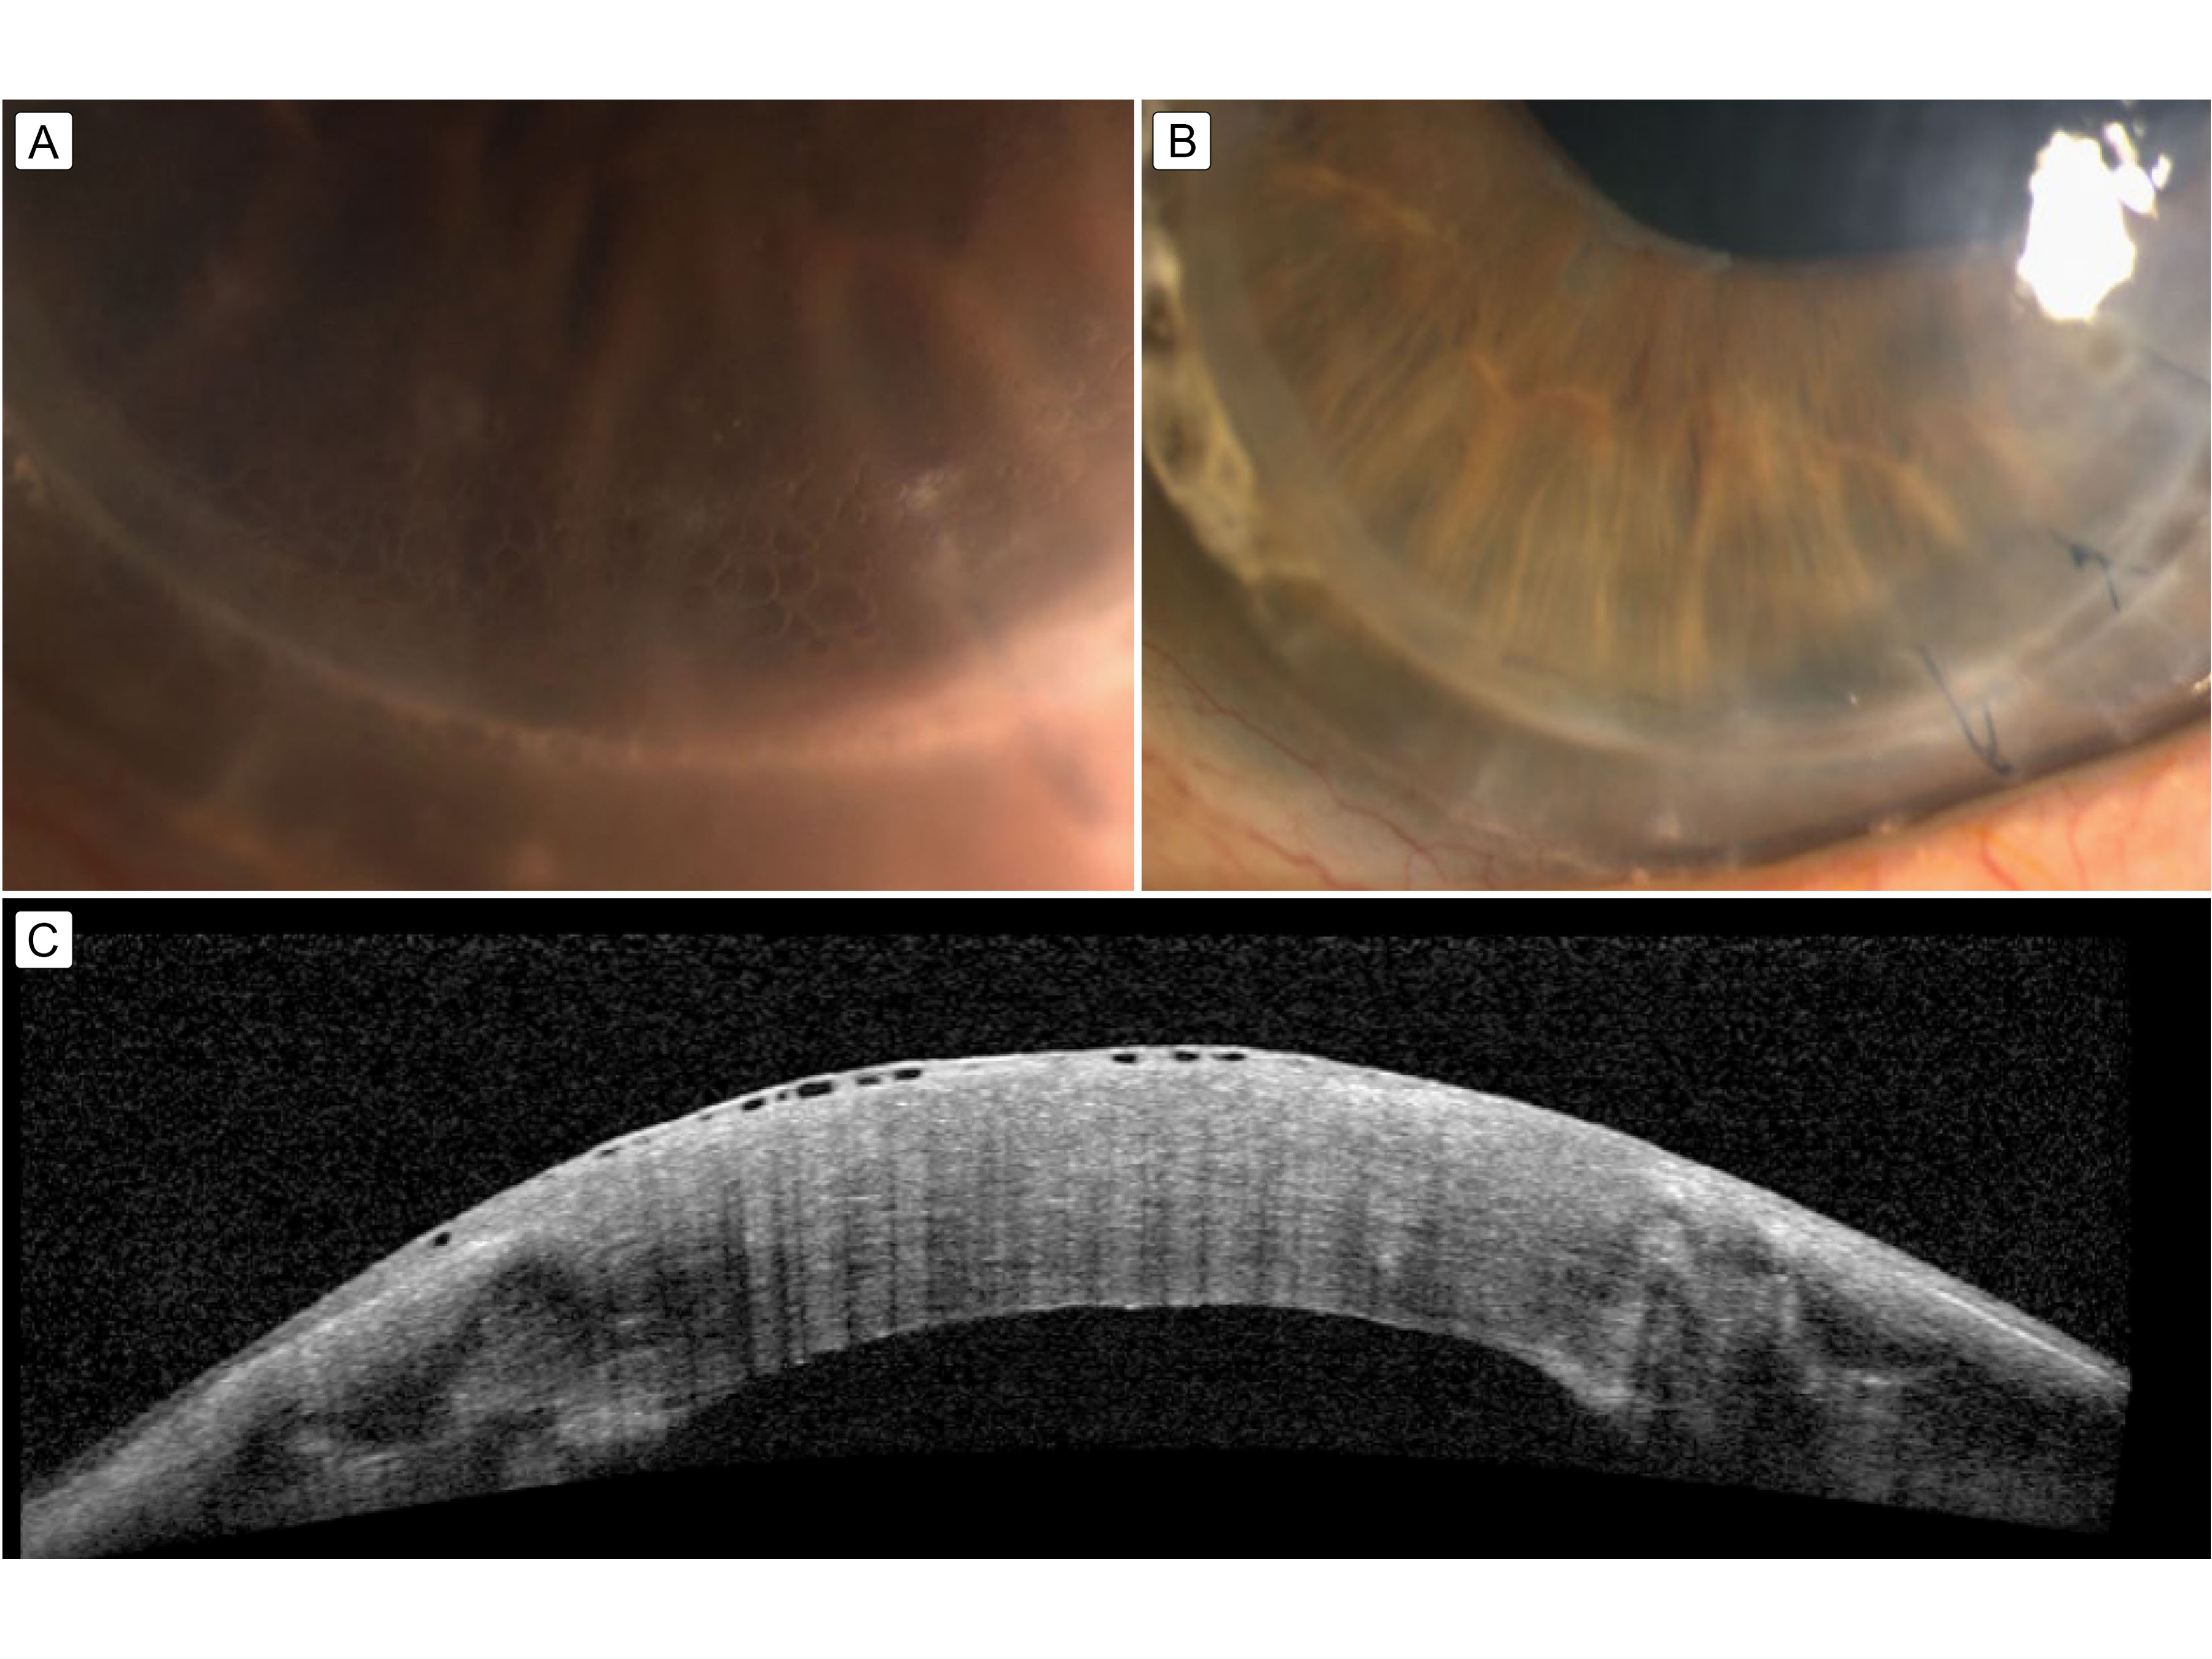 Slit lamp photograph of the left eye showing cystic reticular epithelial change over the inferior border of the penetrating keratoplasty after initiation of netarsudil. B, Anterior segment optical coherence tomography shows intraepithelial cystic changes. C, Four months after initial presentation and discontinuation of netarsudil, the reticular epitheliopathy appeared resolved.